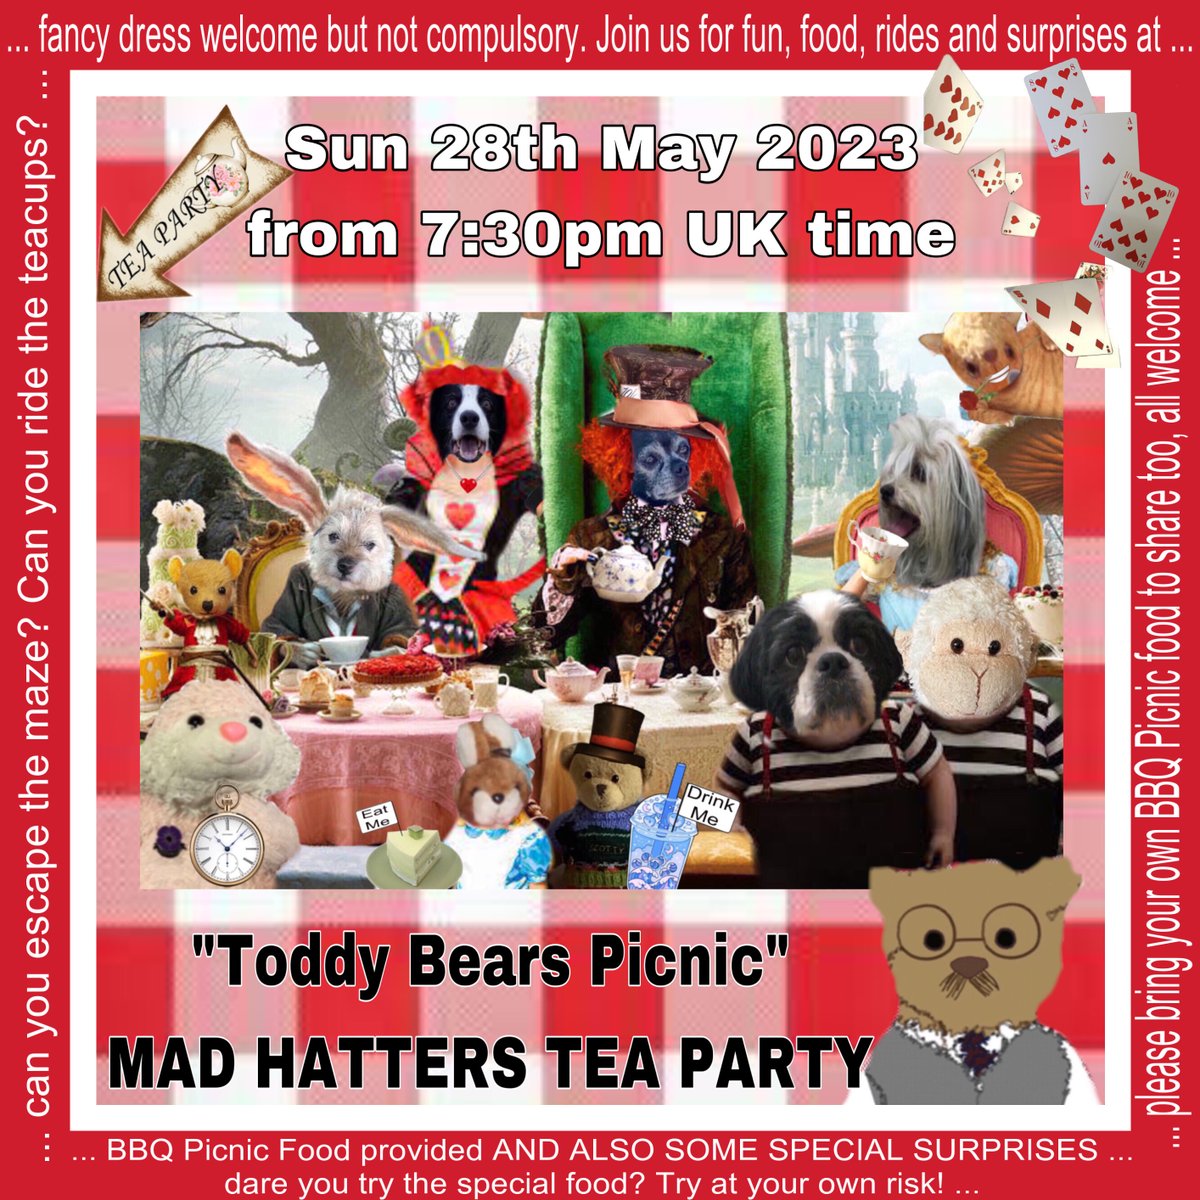 Ello efurry one and welcome to Toddy Bears Picnic Mad Hatters Tea Party woohoo have fun efurry one #furrytails